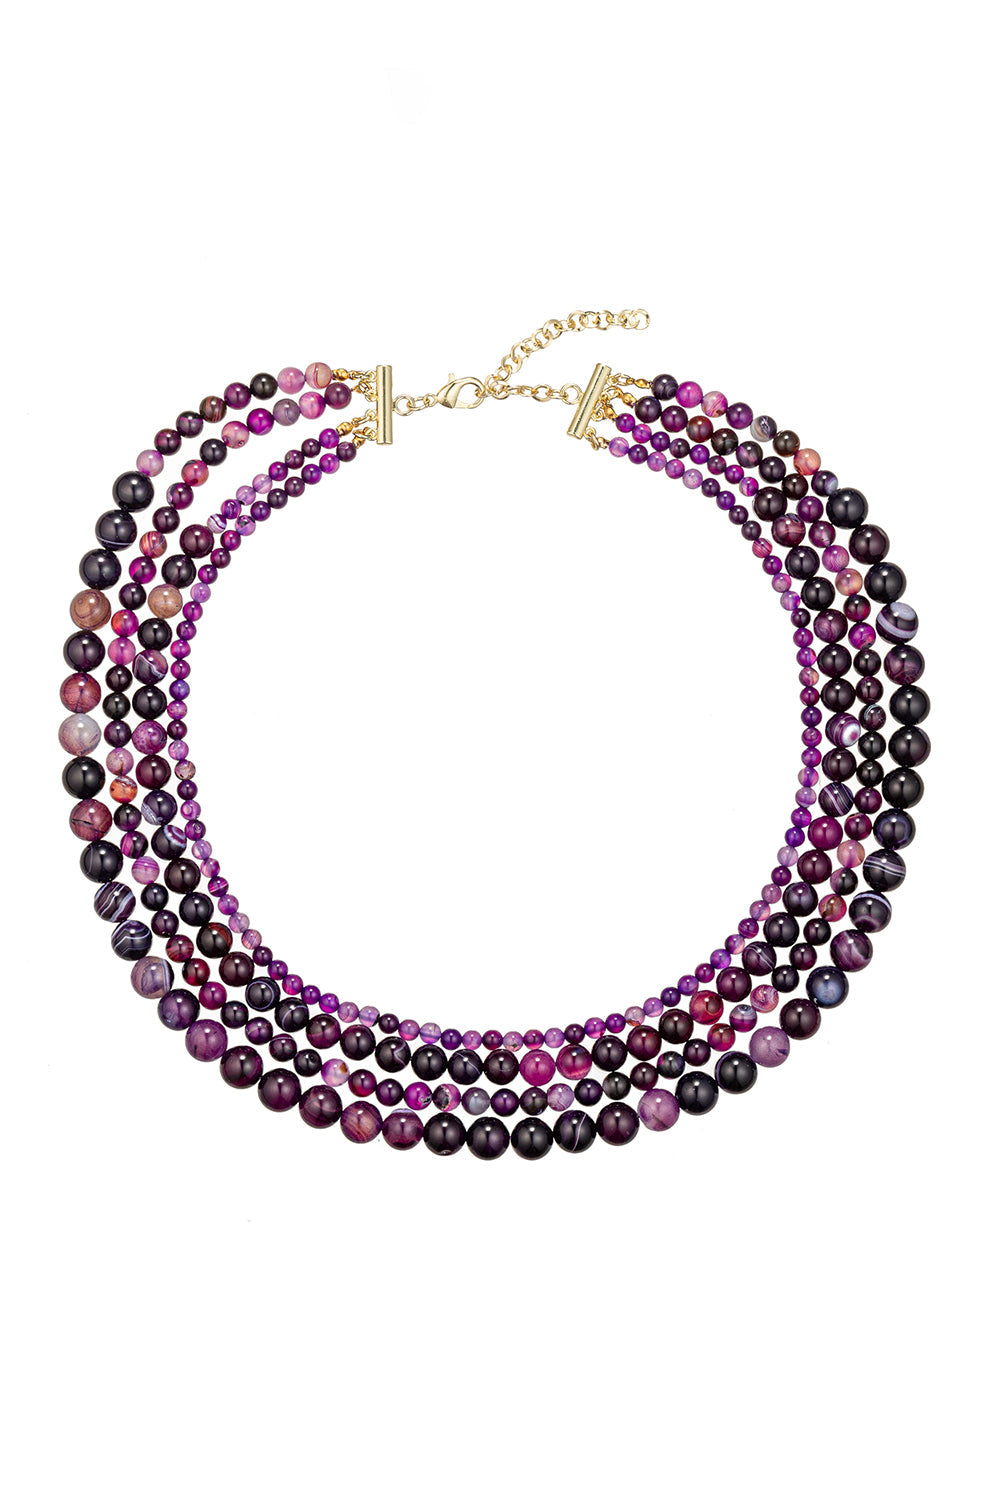 Unleash your inner elegance with a multi-strand necklace featuring amethyst agate beads, adding a touch of royal charm to your ensemble.